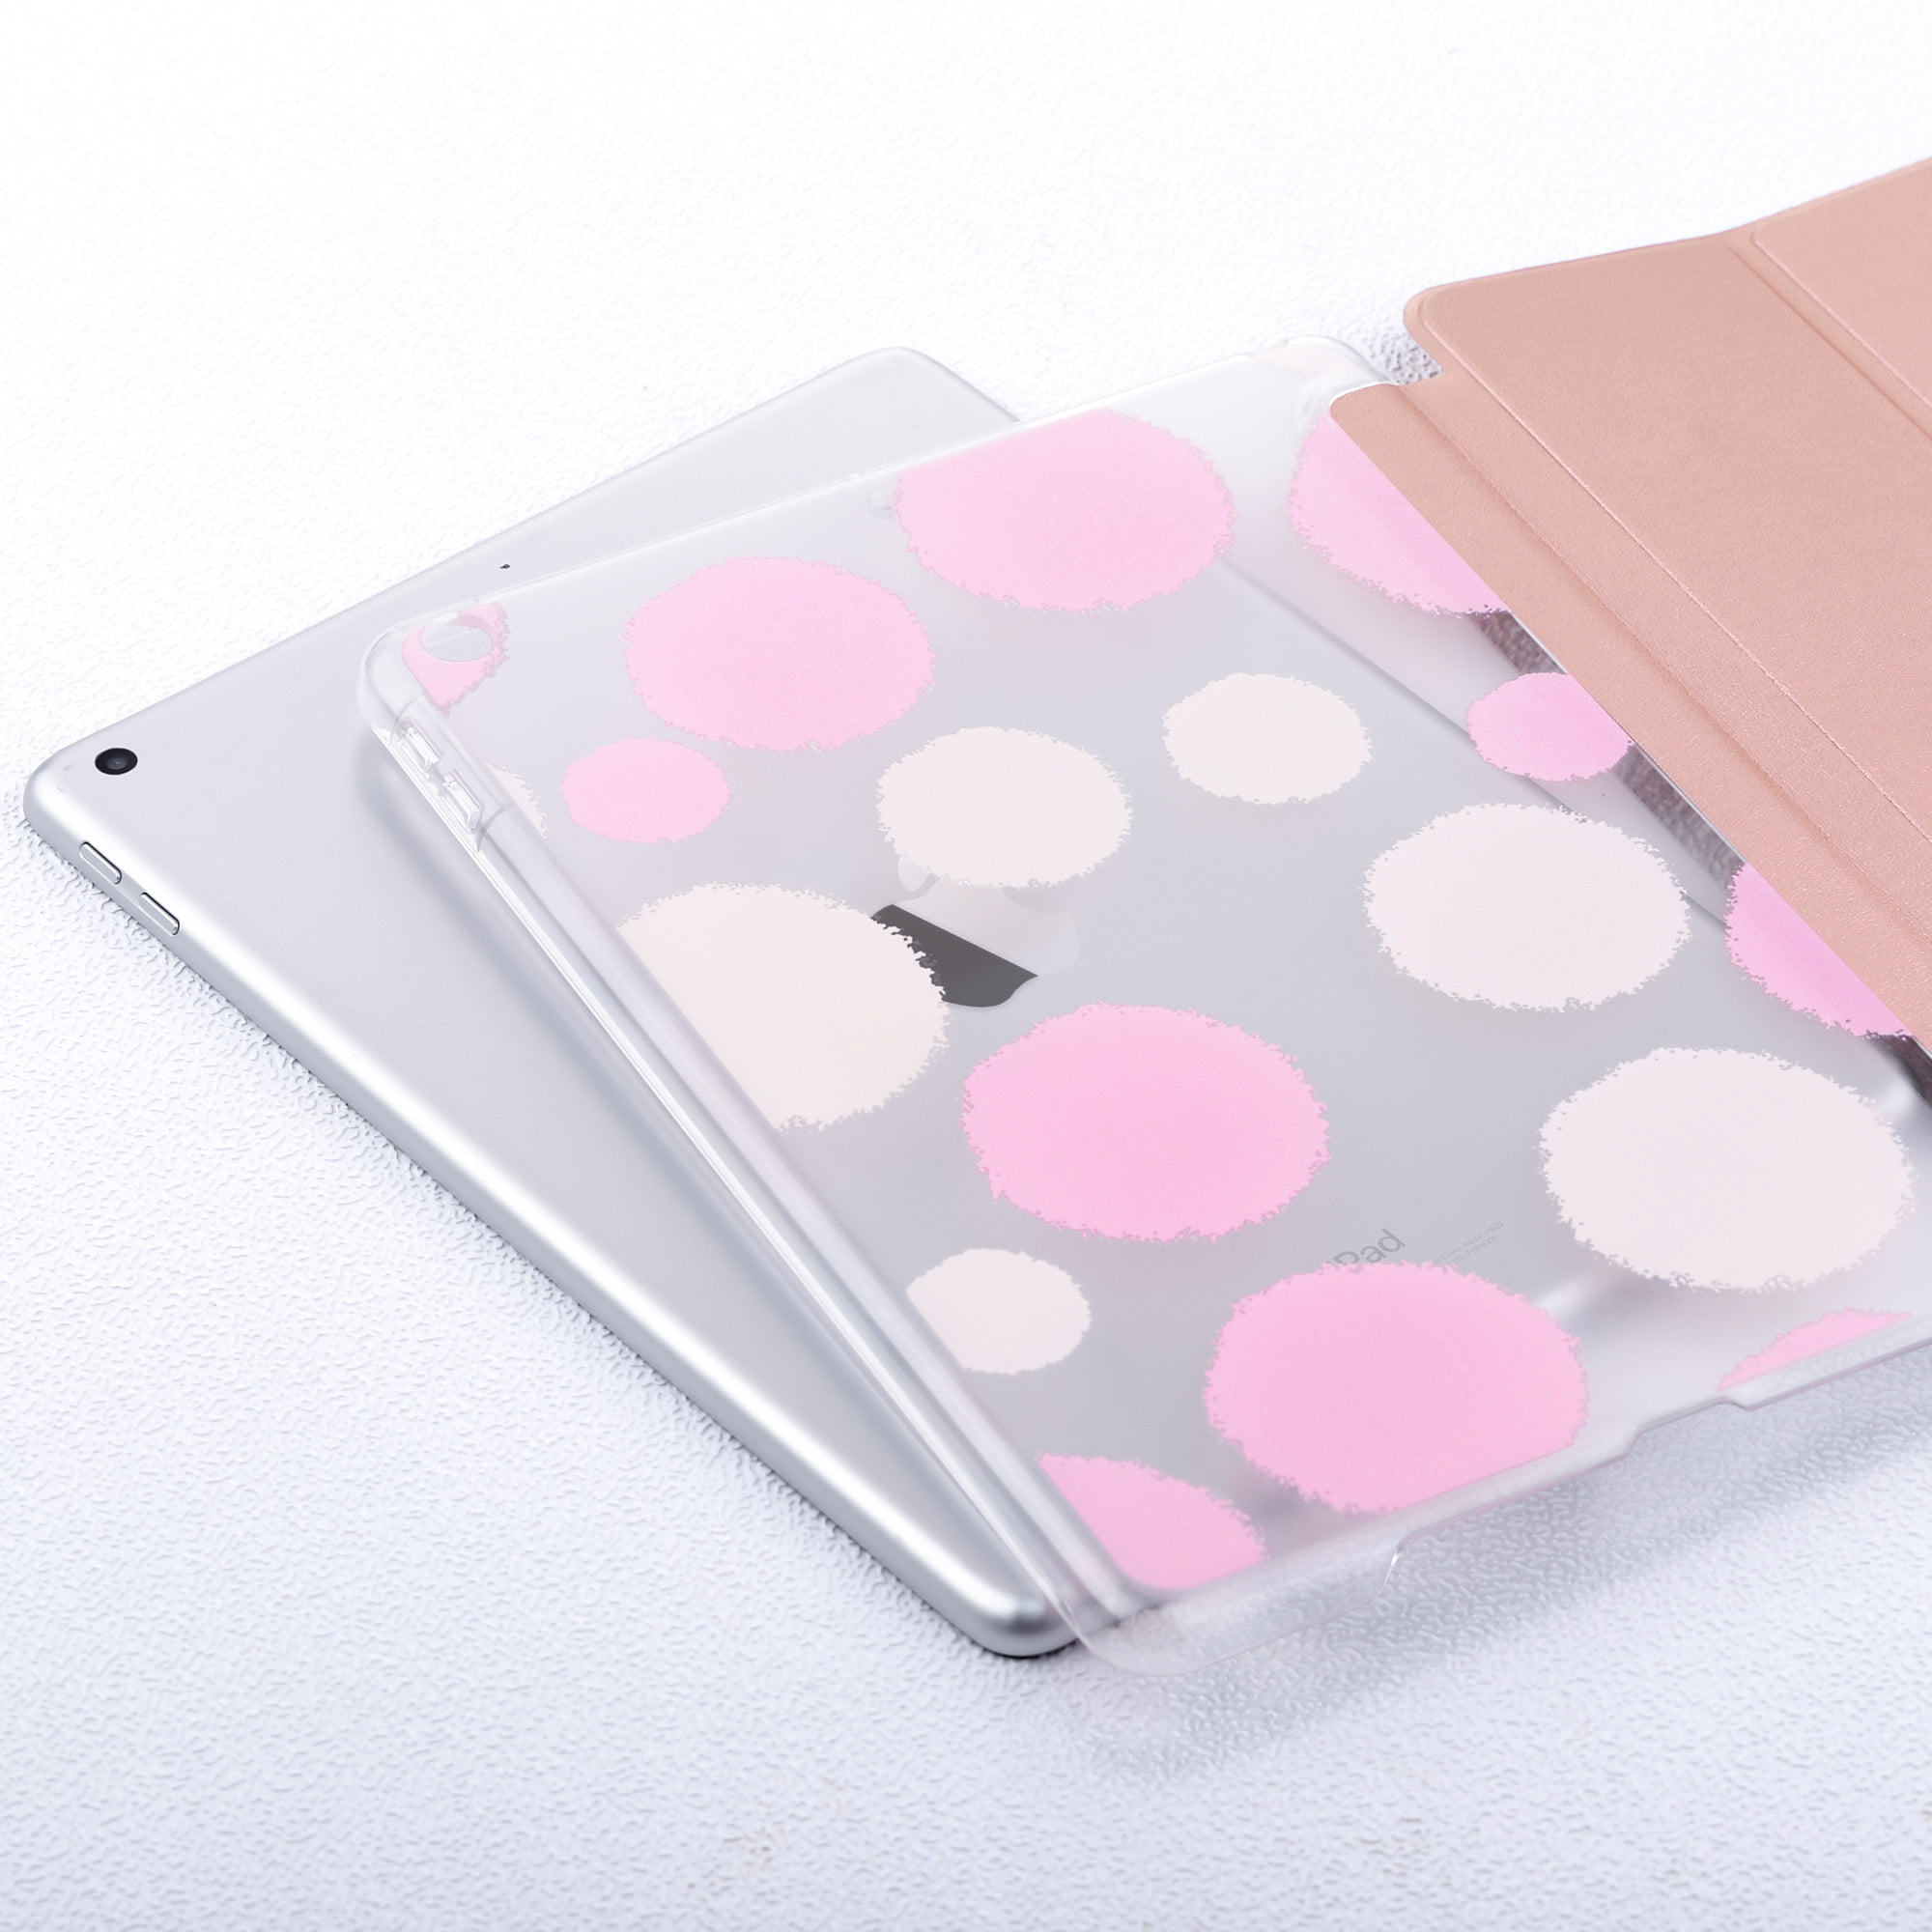 ULAK iPad 10.2 Case 9th 8th 7th Generation, Slim Stand Smart Shockproof  Cover for Apple iPad 9th 8th 7th Gen 2021/2020/2019, Mint Floral -  Walmart.com